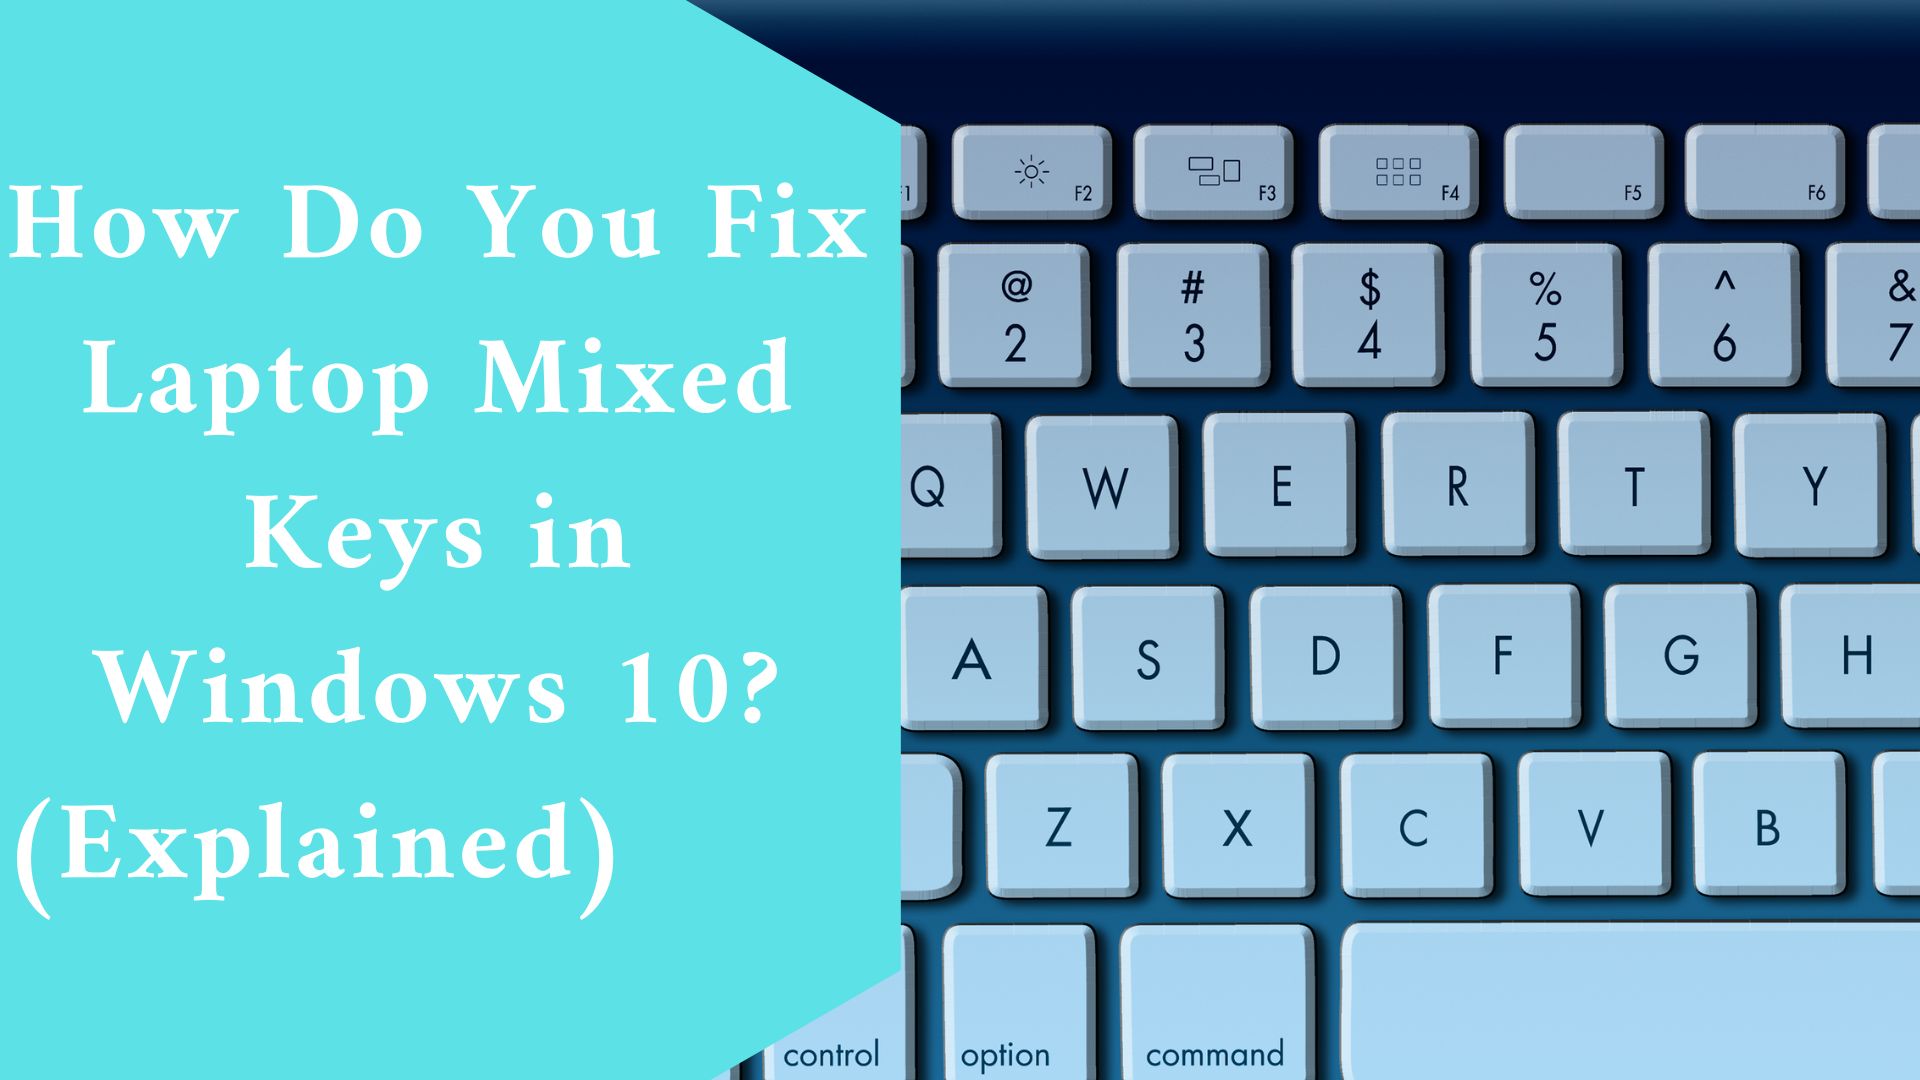 How Do You Fix Laptop Mixed Keys in Windows 10? (Explained)